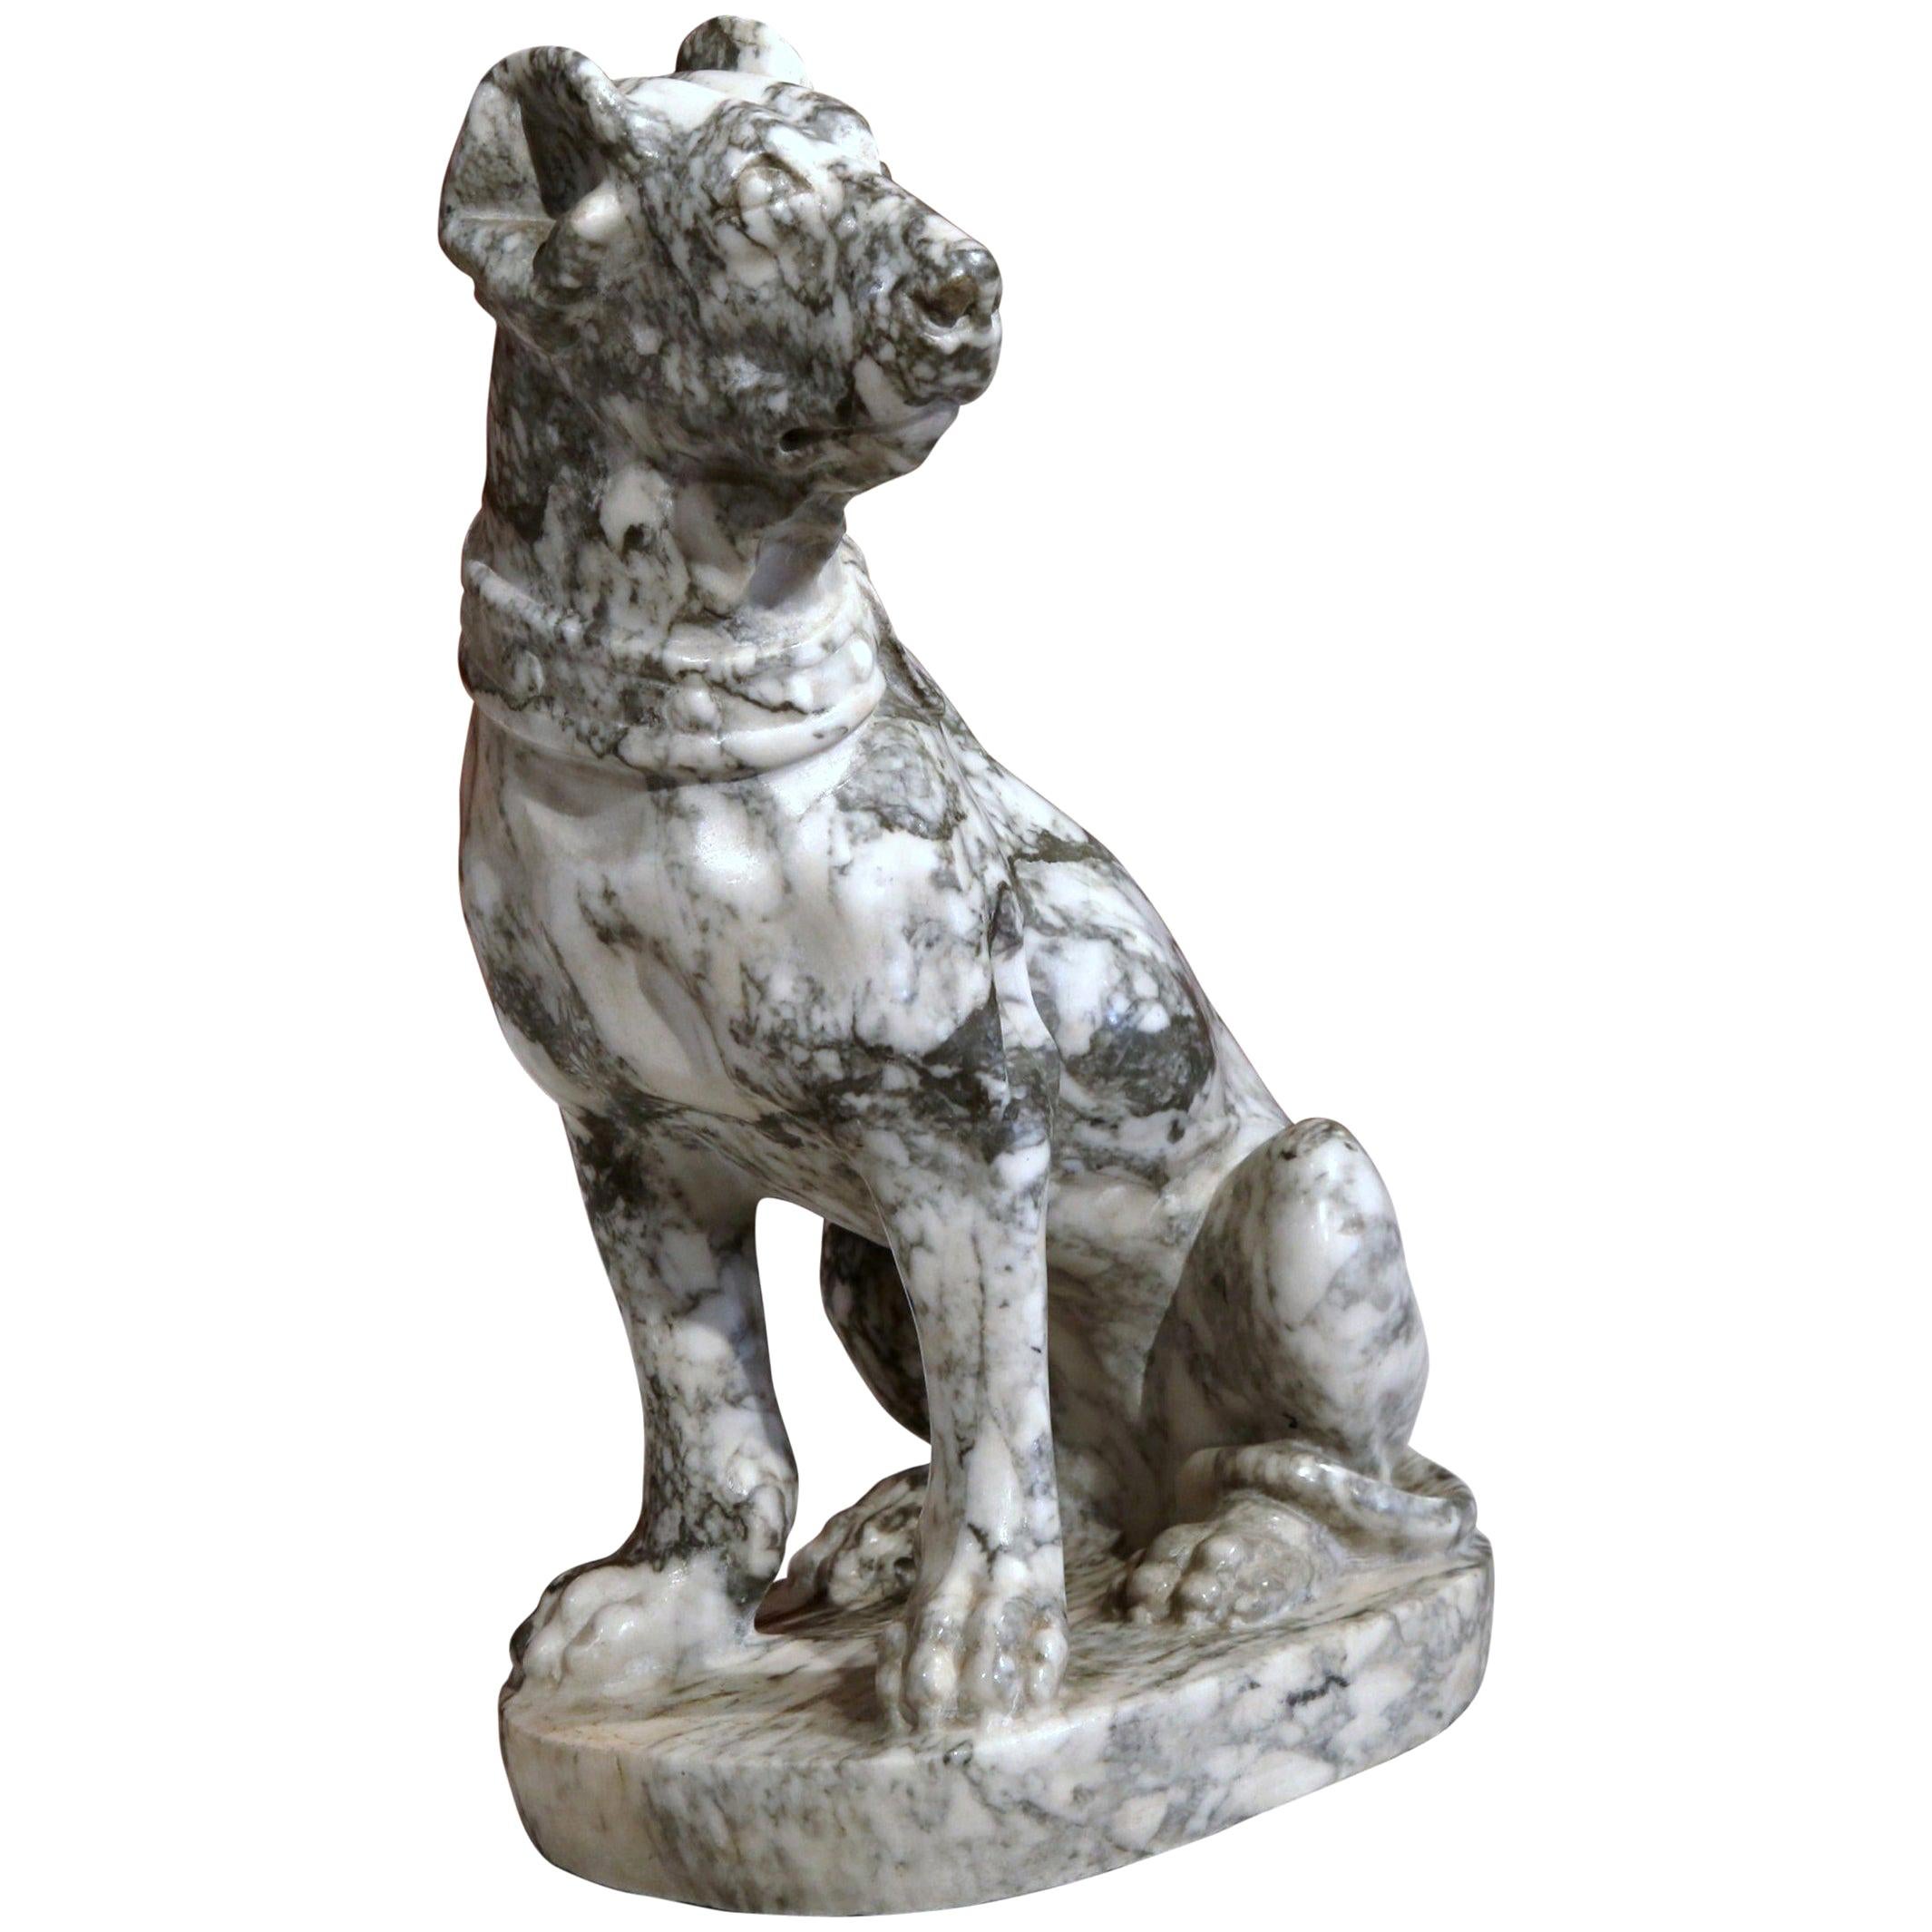 This elegant antique marble dog figure was crafted in France, circa 1870, the animal sculpture in a seated position on an oval base, features a carved collar around the neck. Excellent condition with intricate detail work, wonderful proportions and